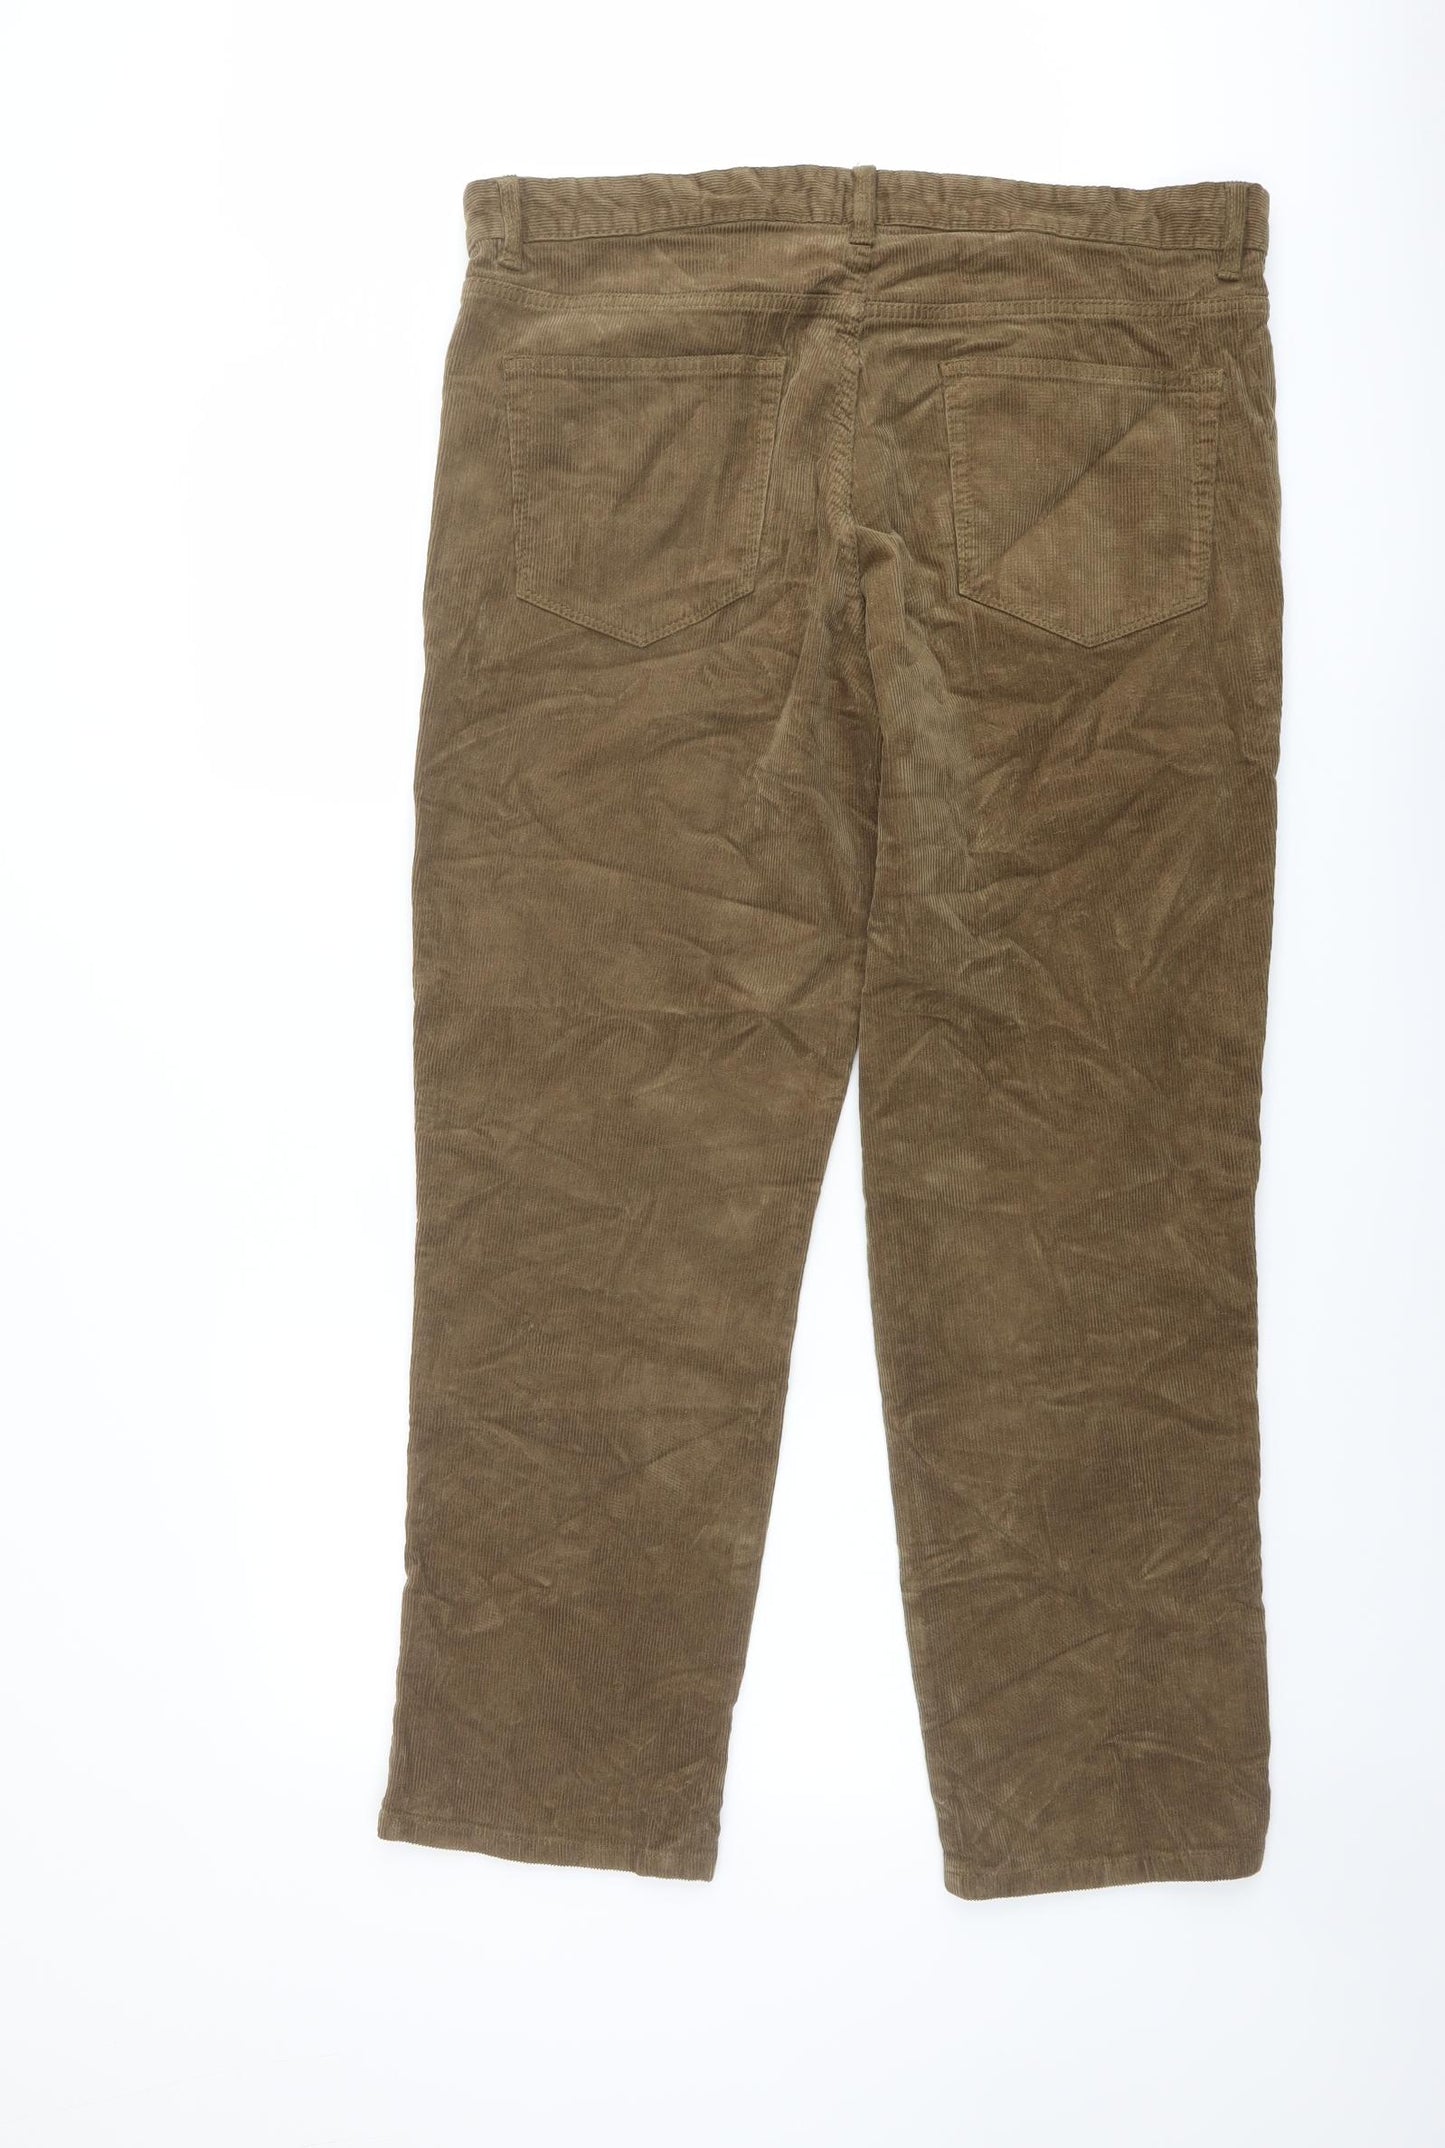 TU Mens Brown Cotton Trousers Size 36 in L30 in Regular Button